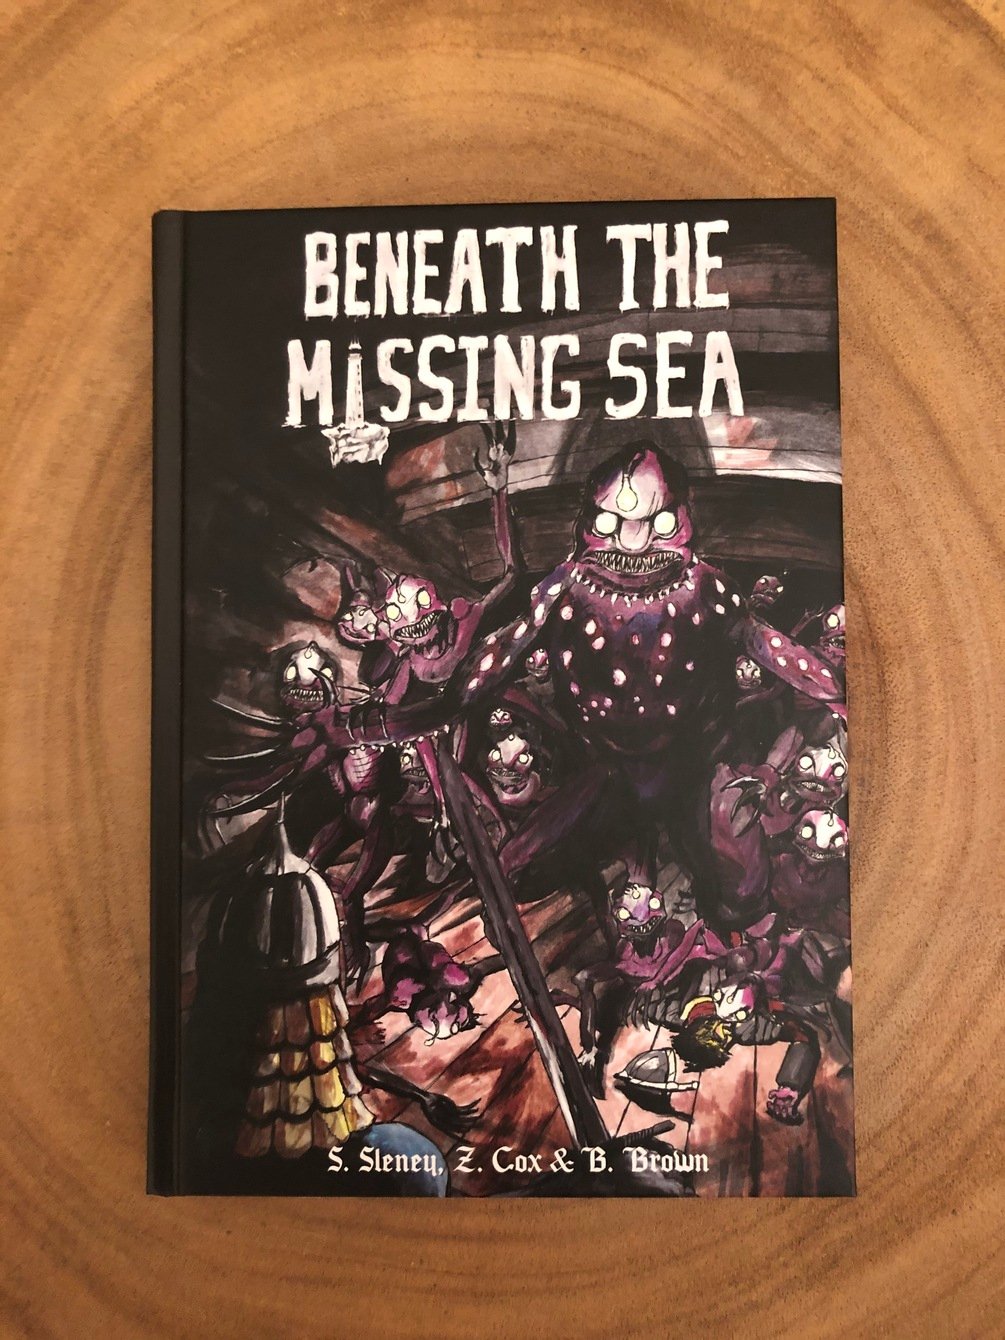 Best Left Buried: Beneath The Missing Sea